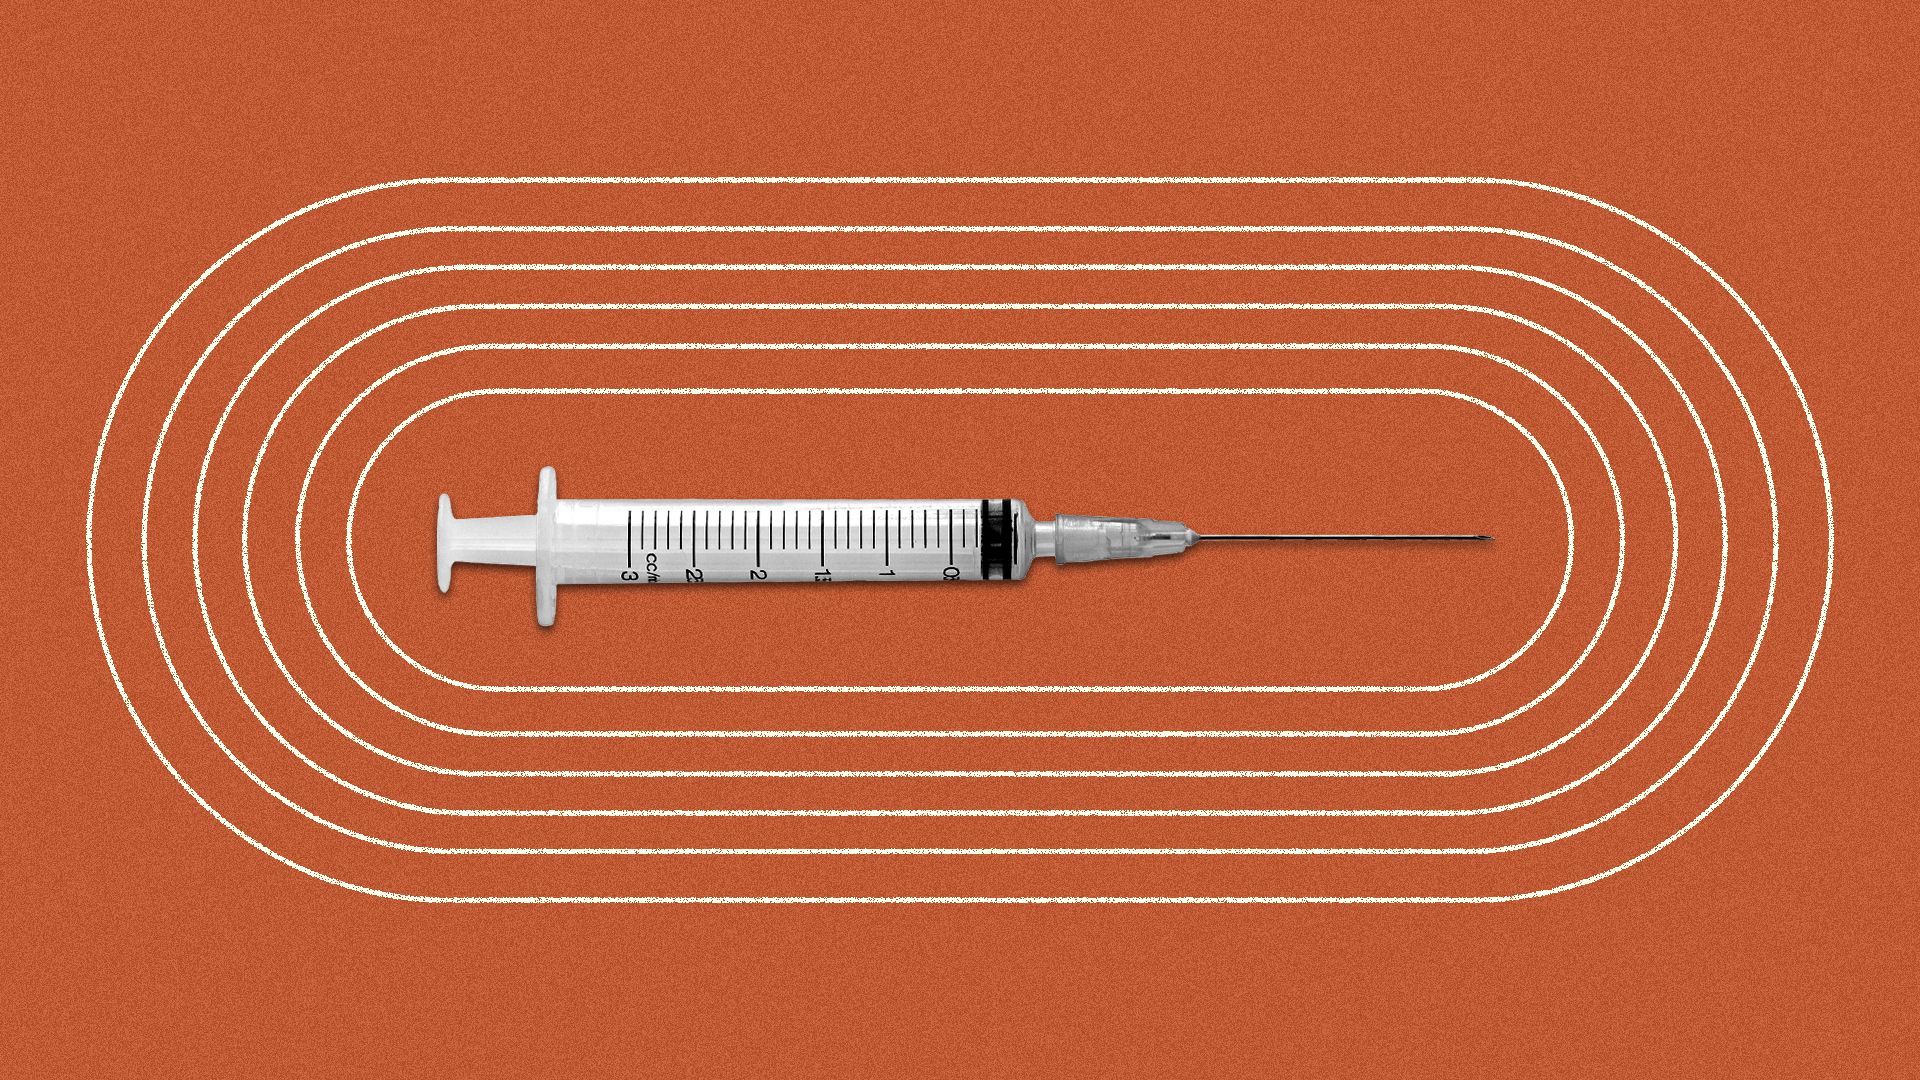 Illustration of a syringe at the center of an oval racetrack